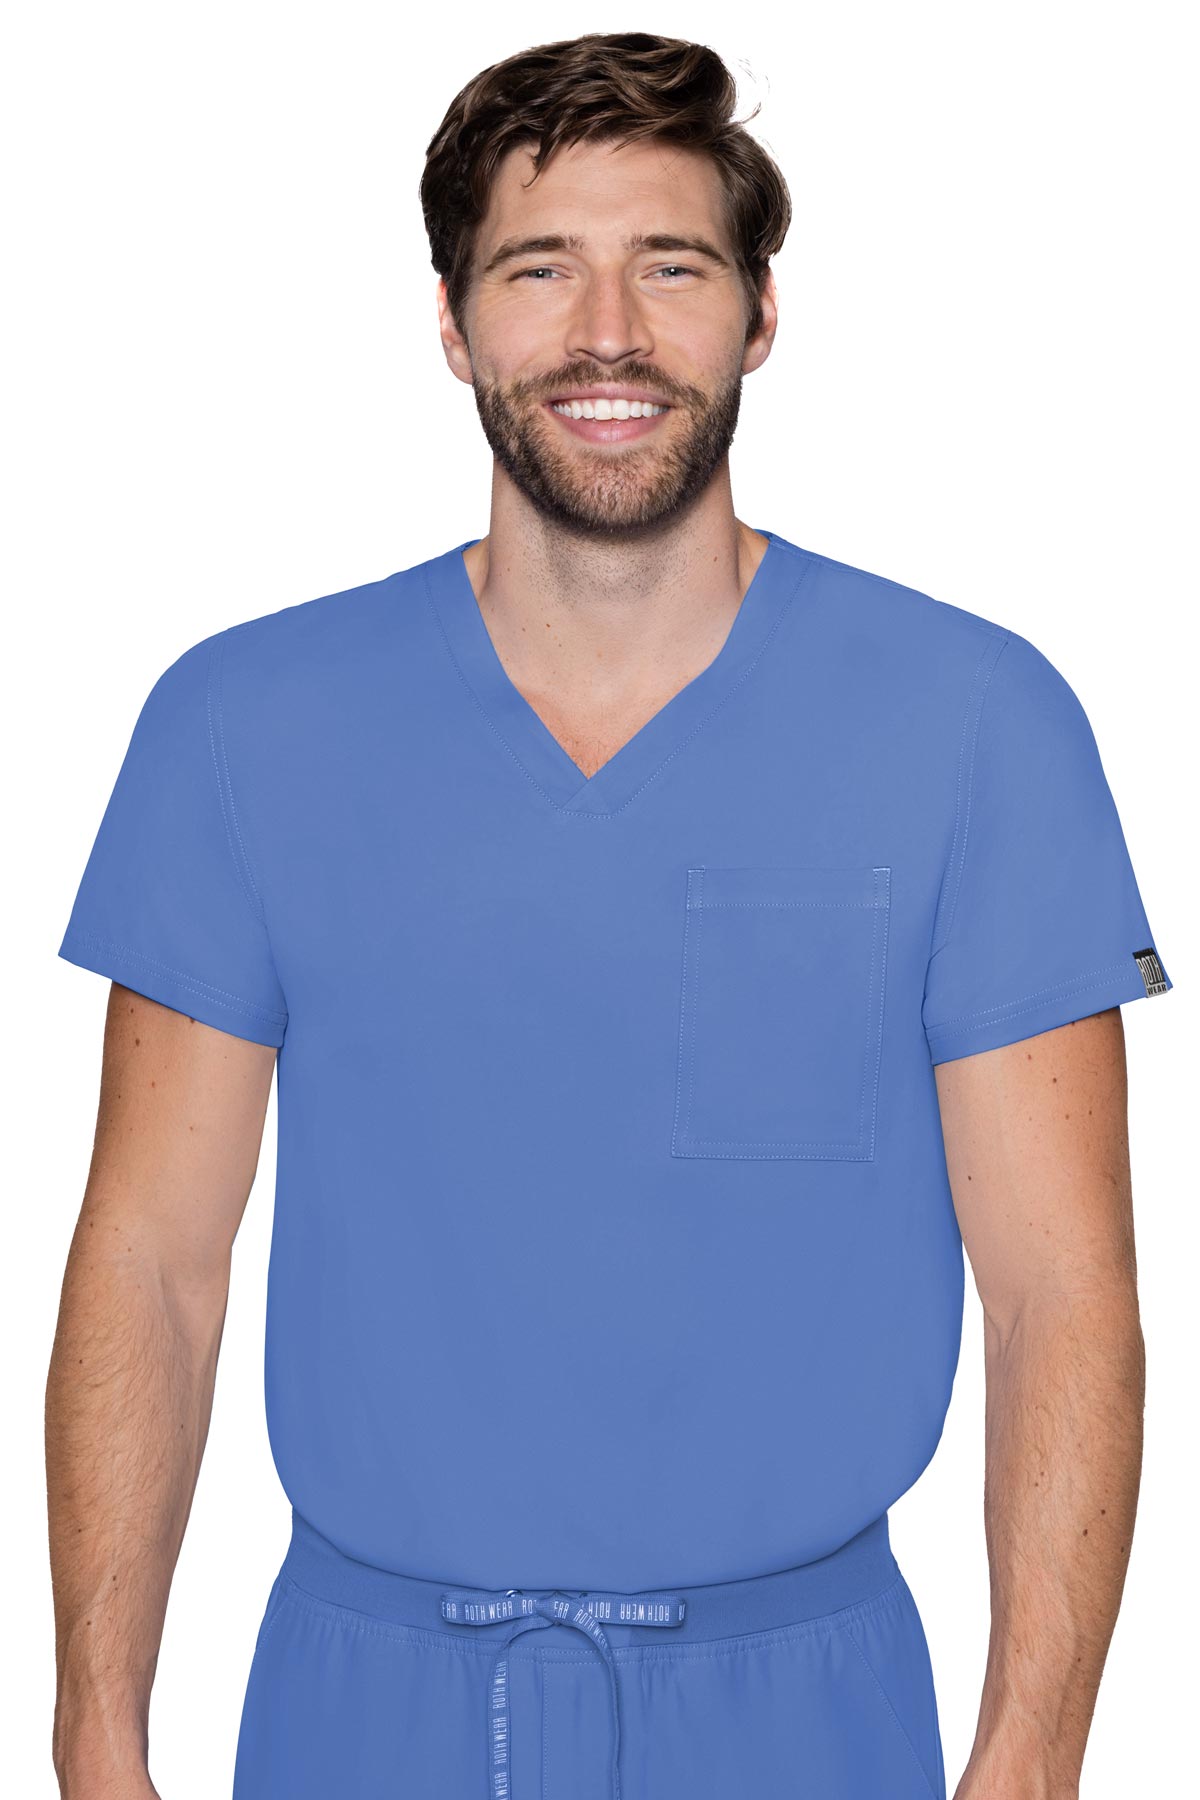 Med Couture Men's Scrub Top RothWear Insight in ceil at Parker's Clothing and Shoes.